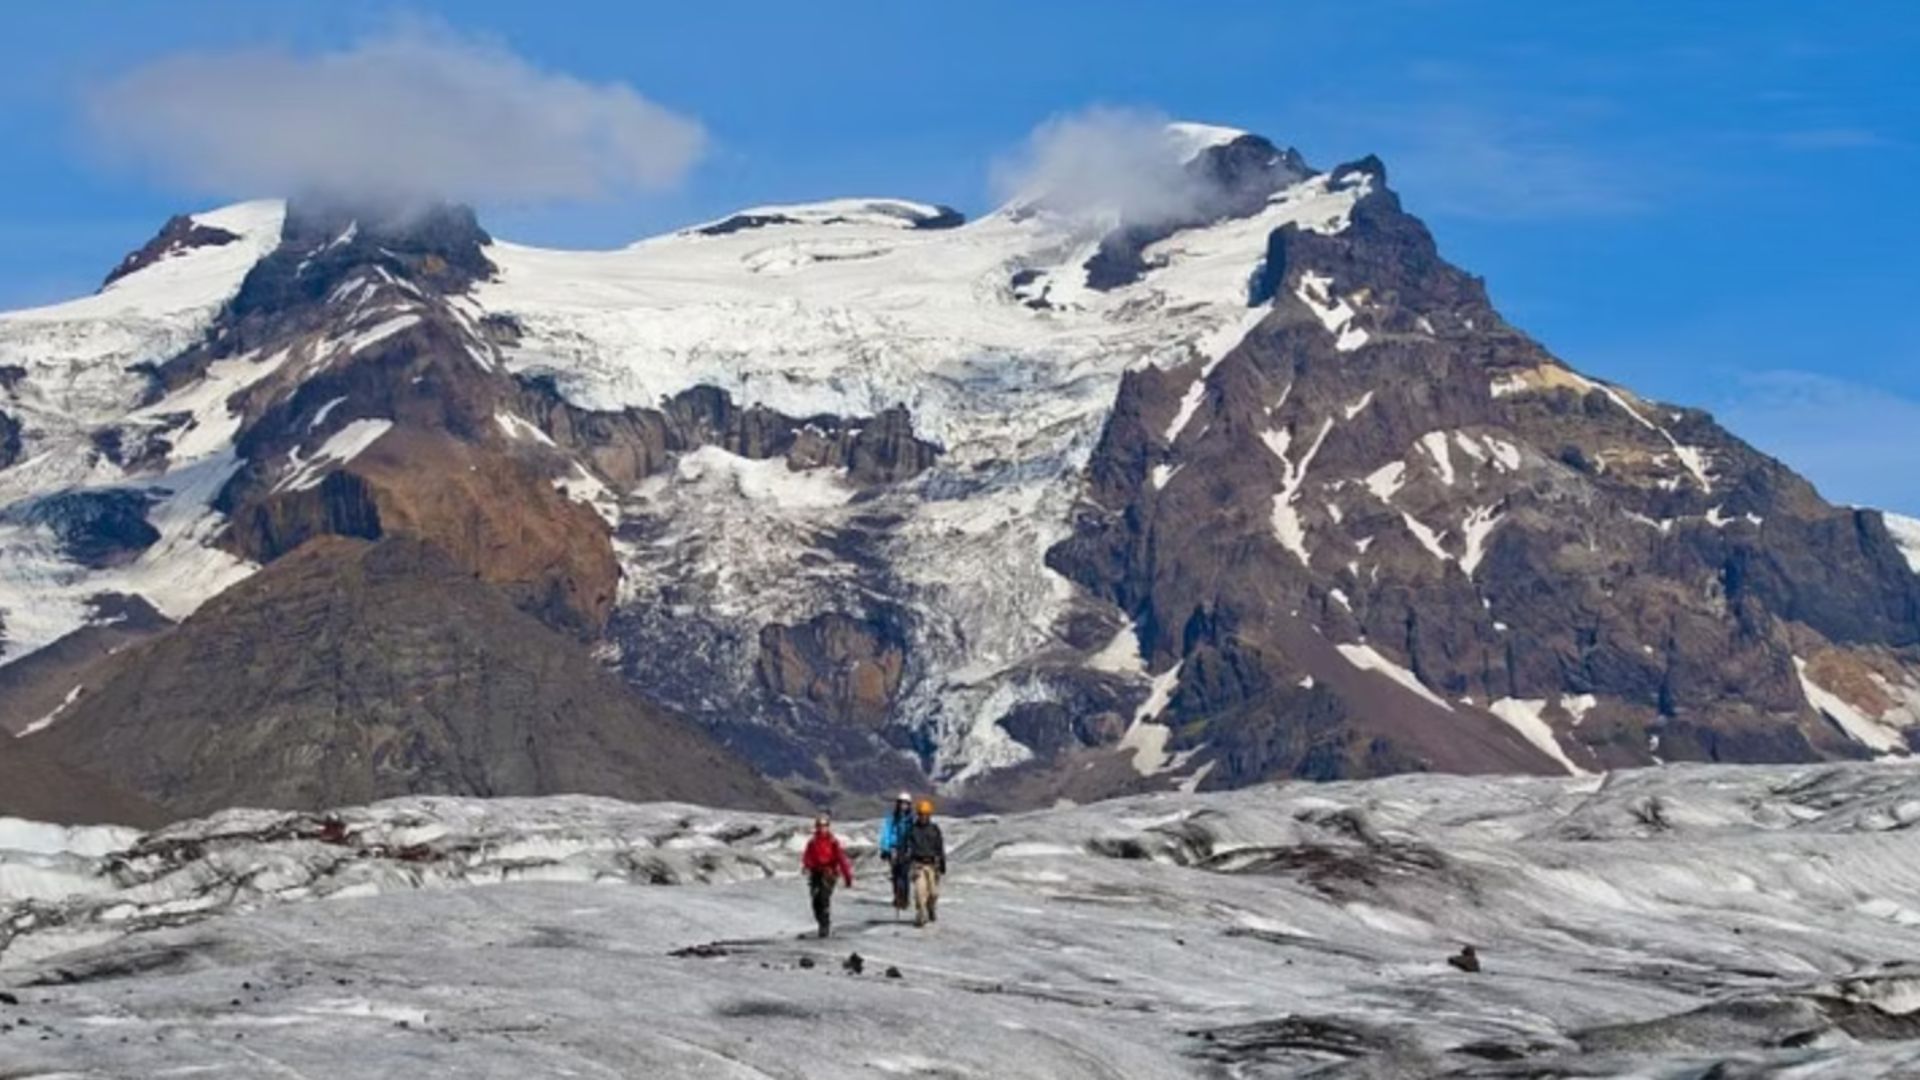 Tourists hiking on the glacier in Iceland